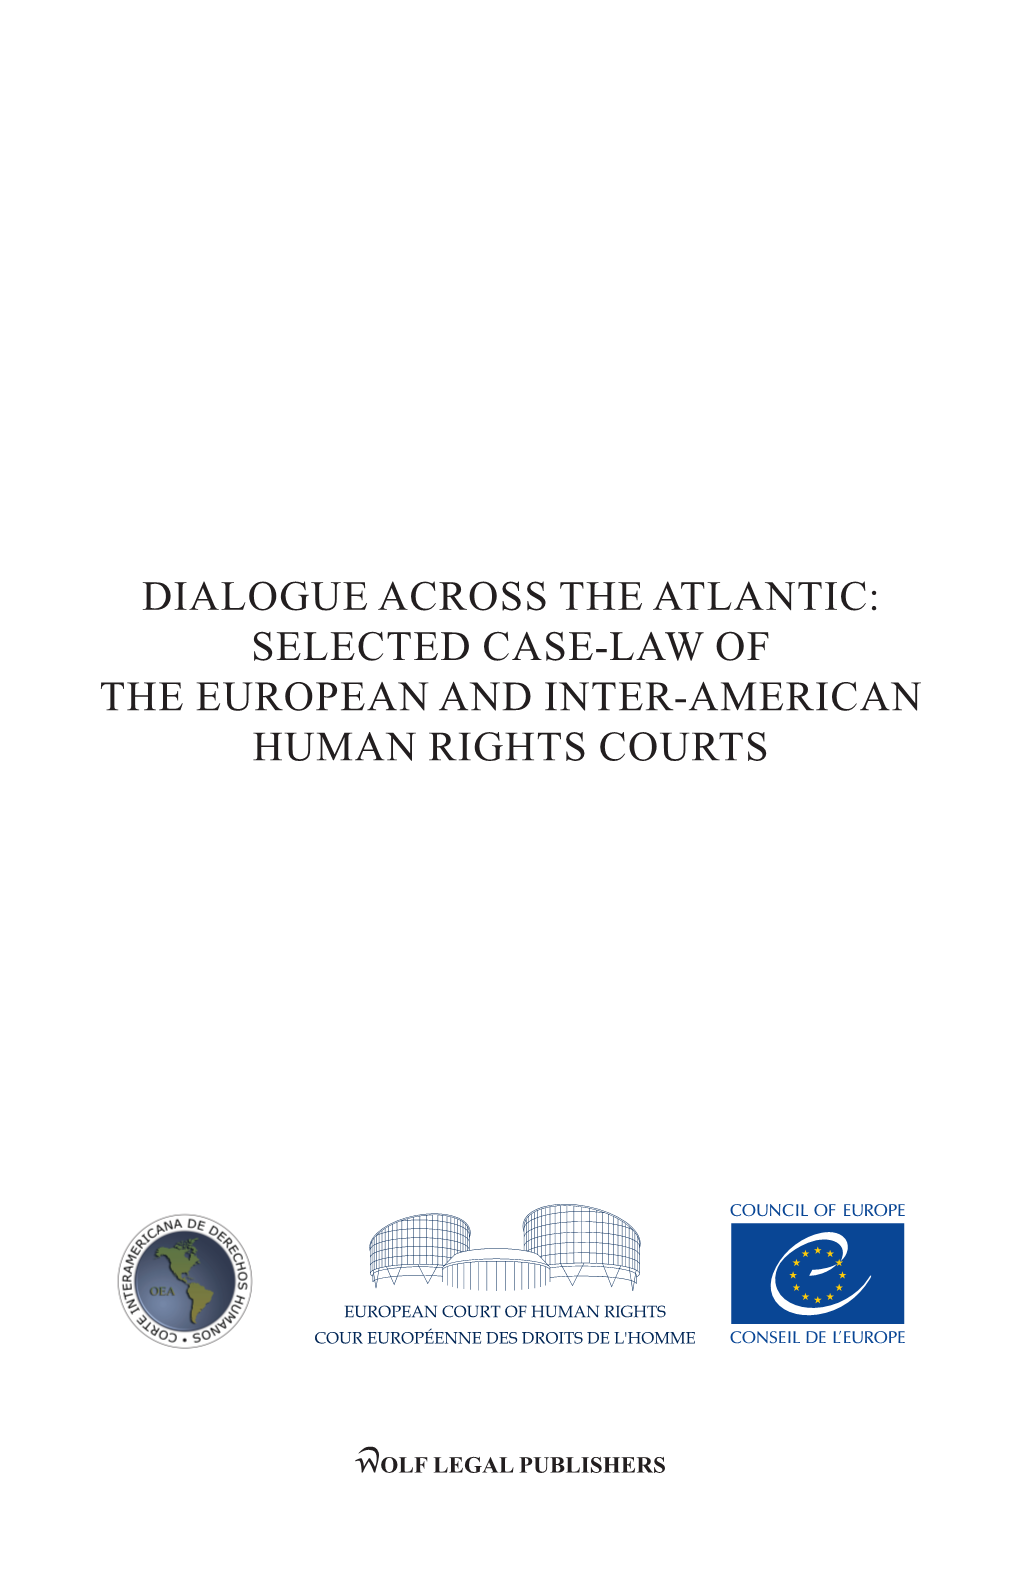 Dialogue Across the Atlantic: Selected Case-Law of the European and Inter-American Human Rights Courts